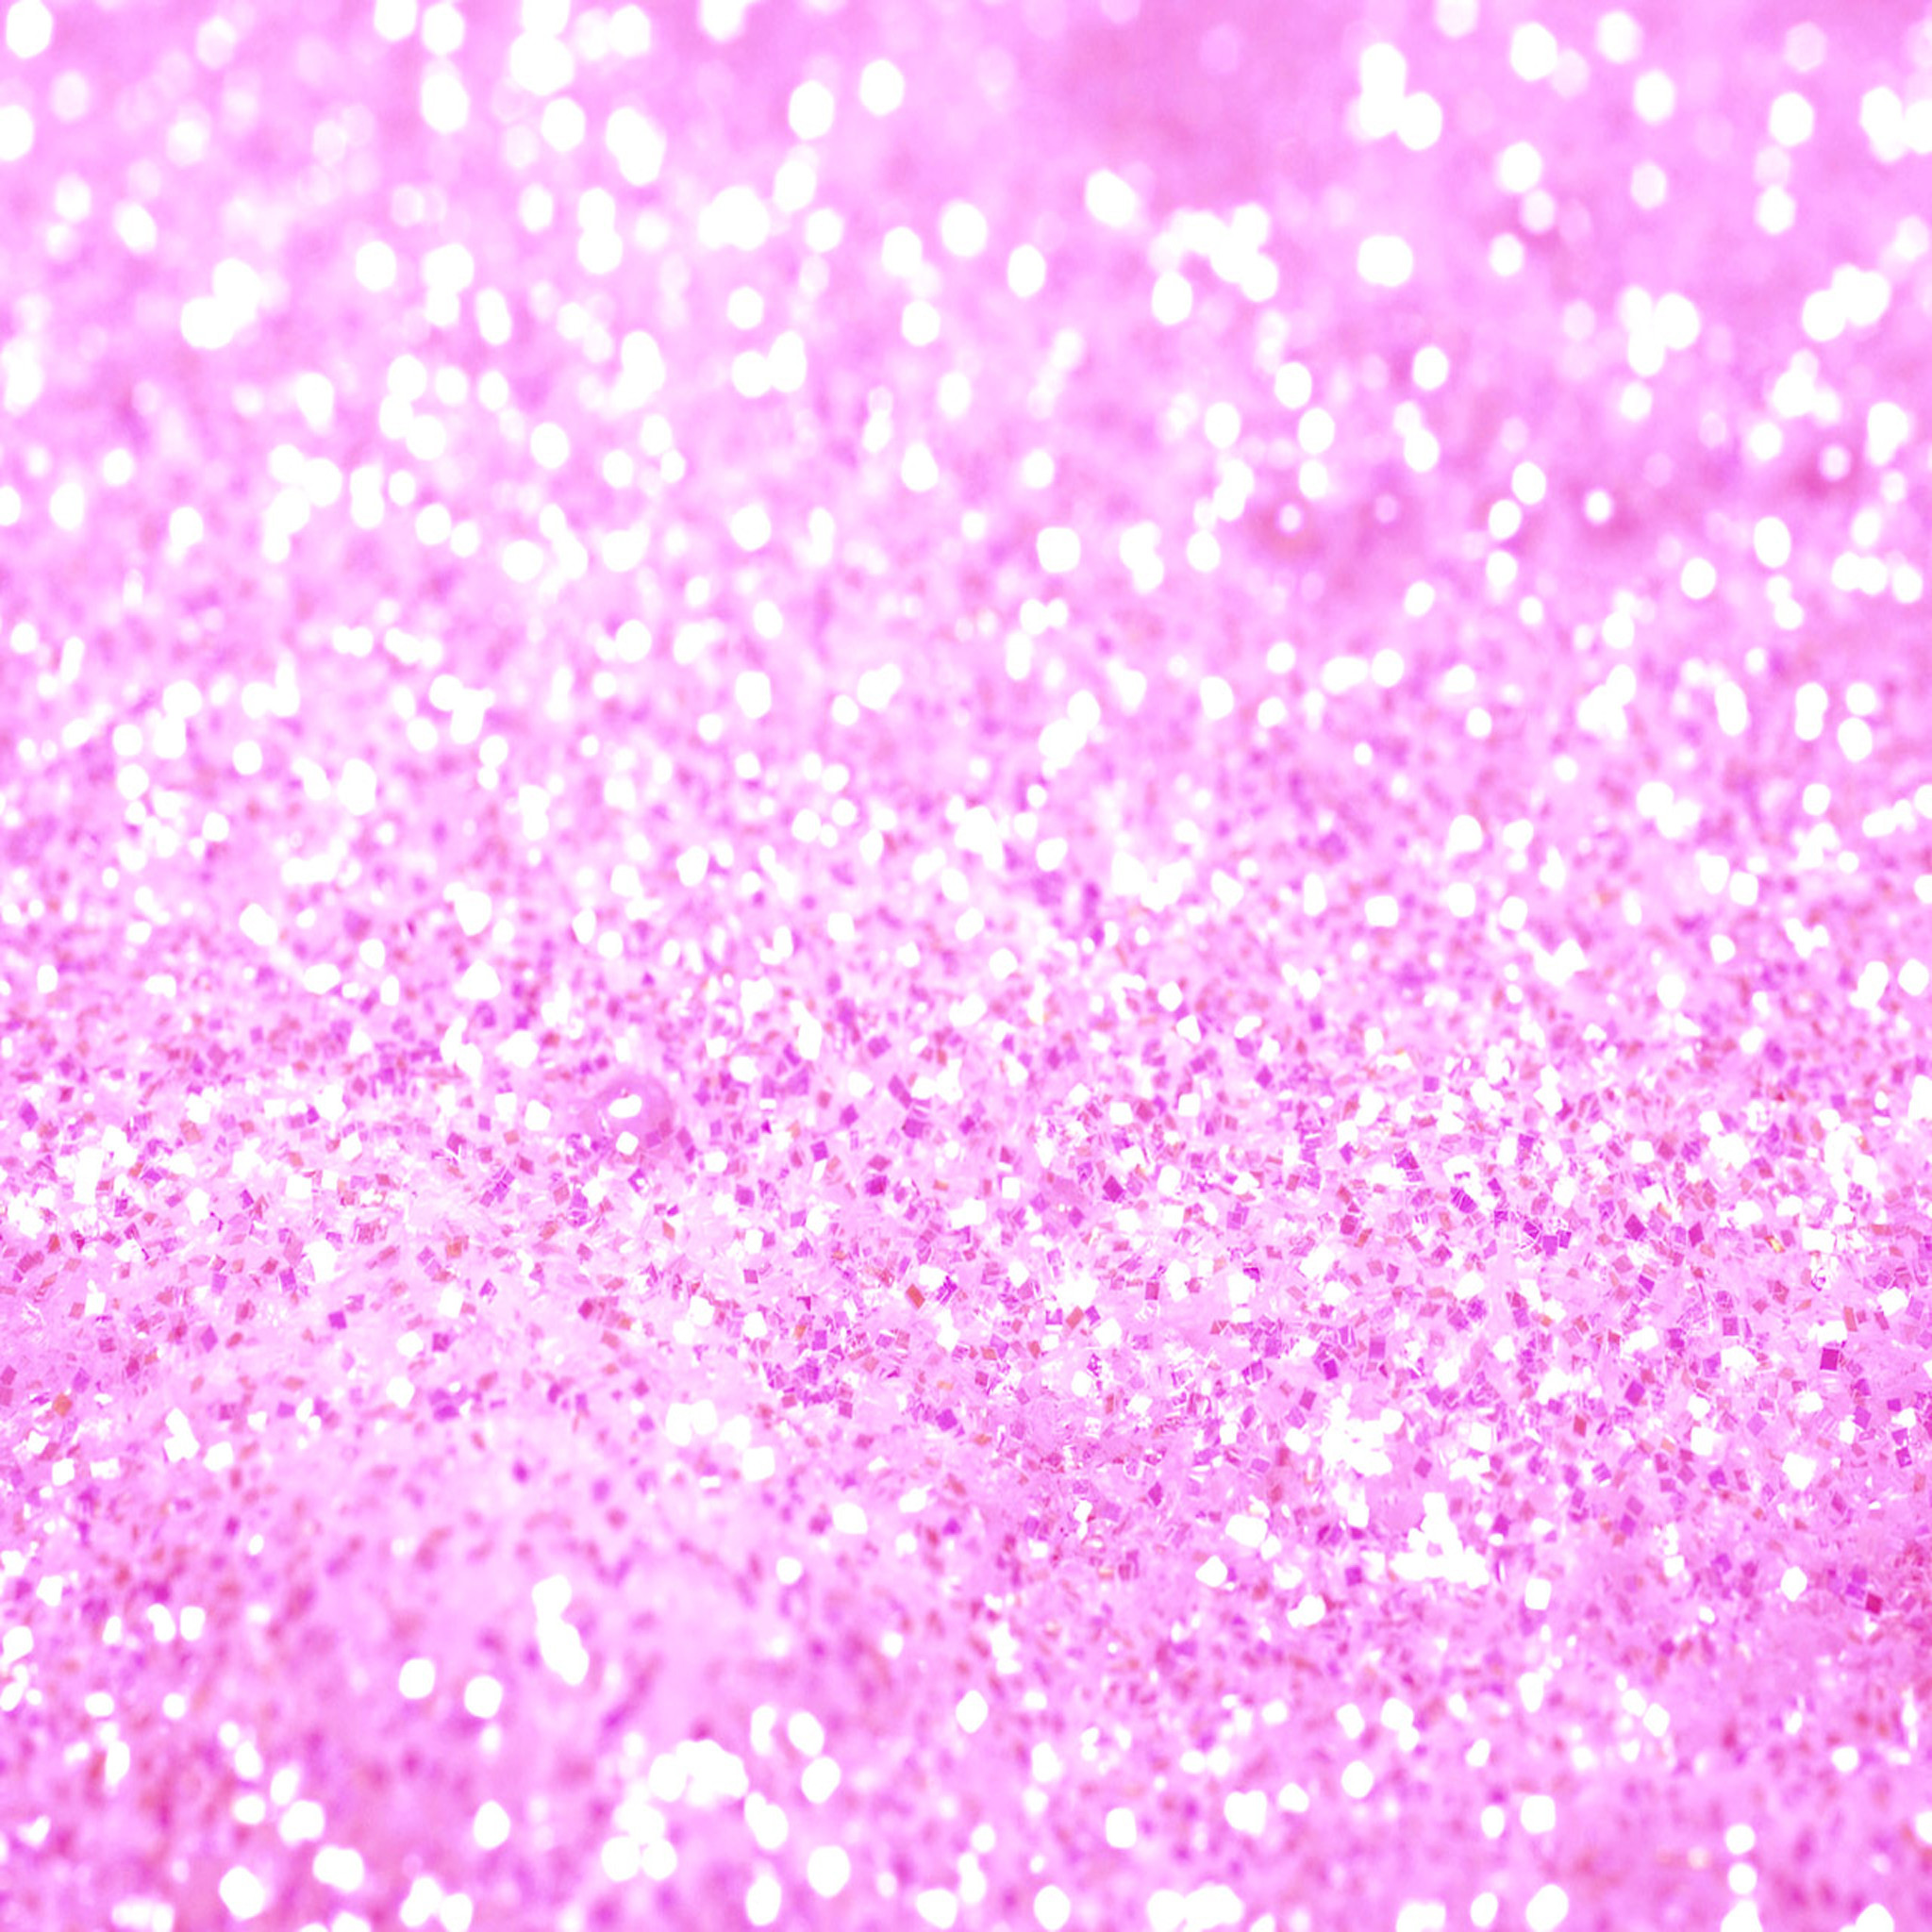 2048x2048 Pink Glitter. Tap image for more glitter wallpapers for iPhone, iPad &  Android!